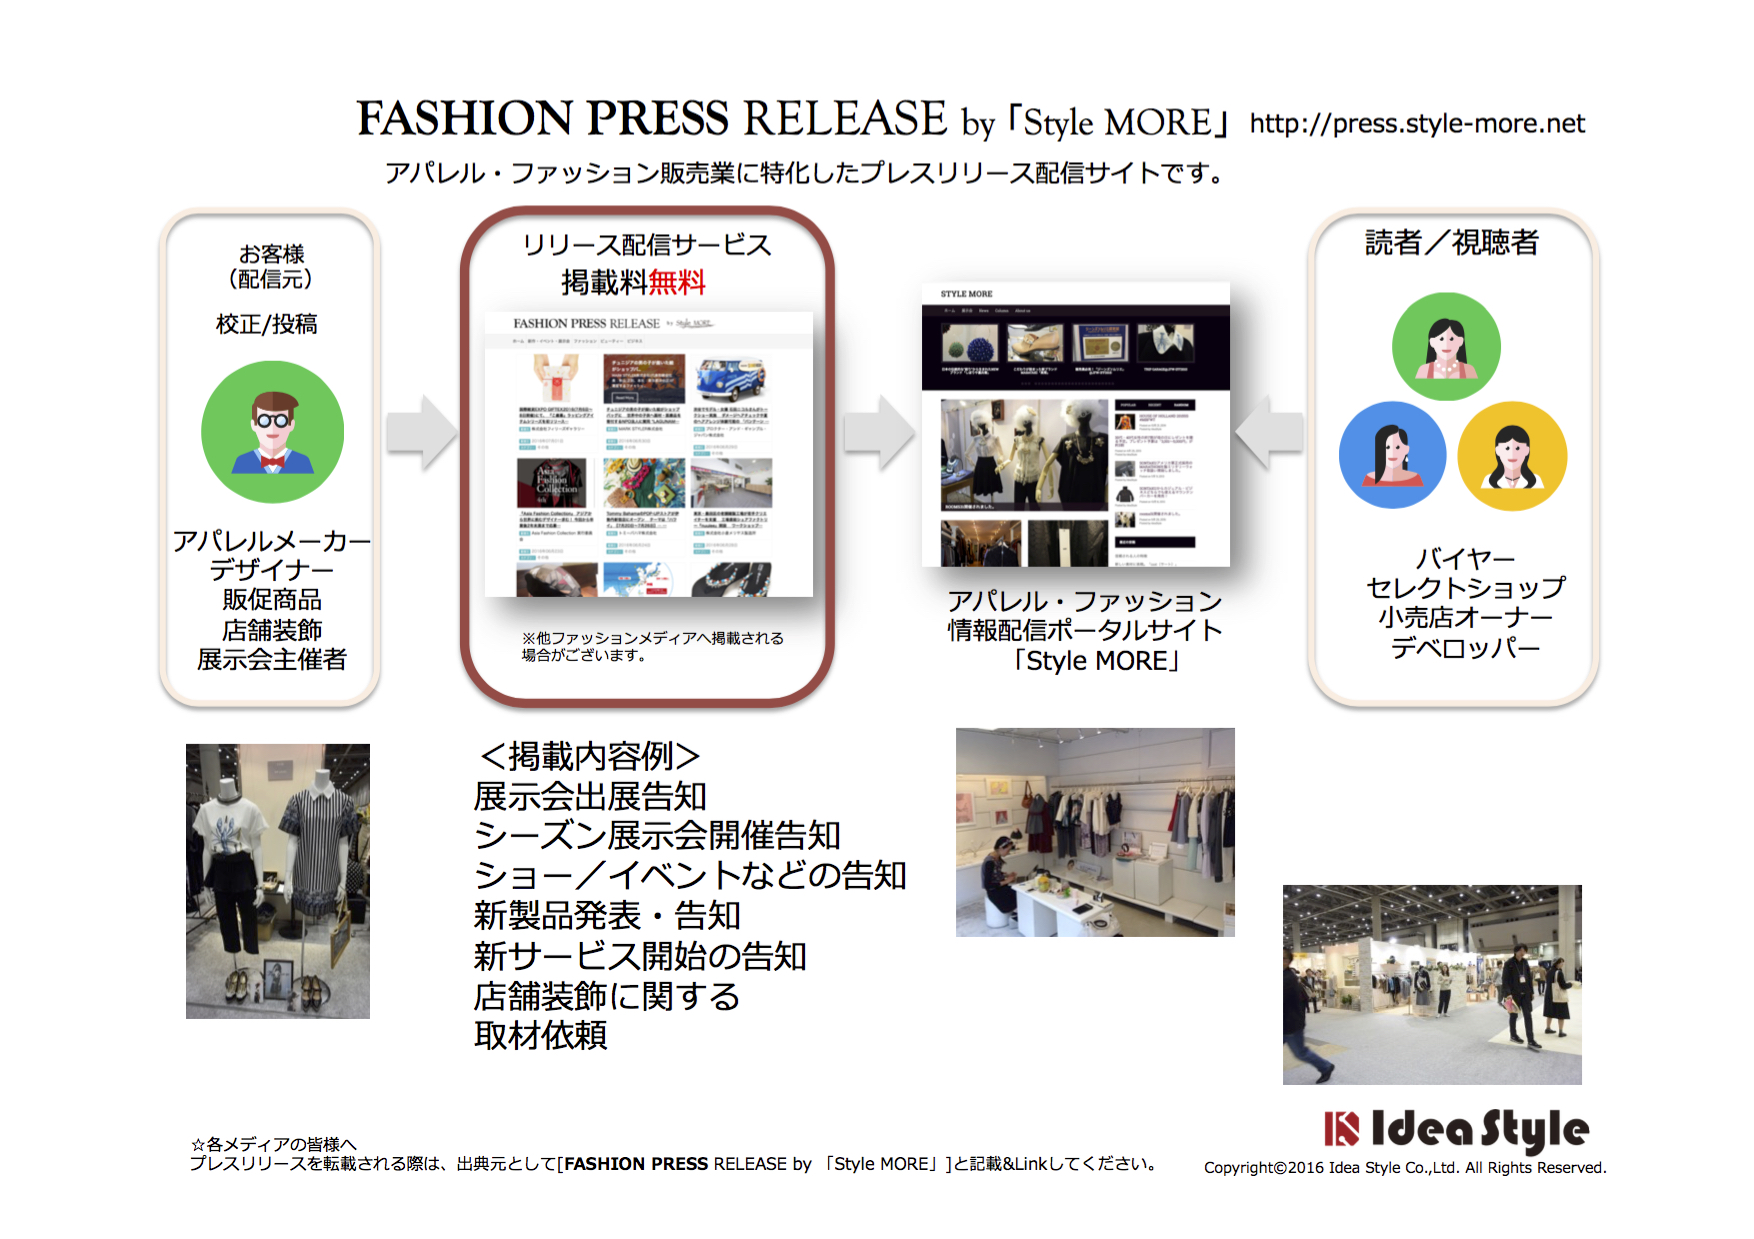 Fashion Press Release by Style MORE